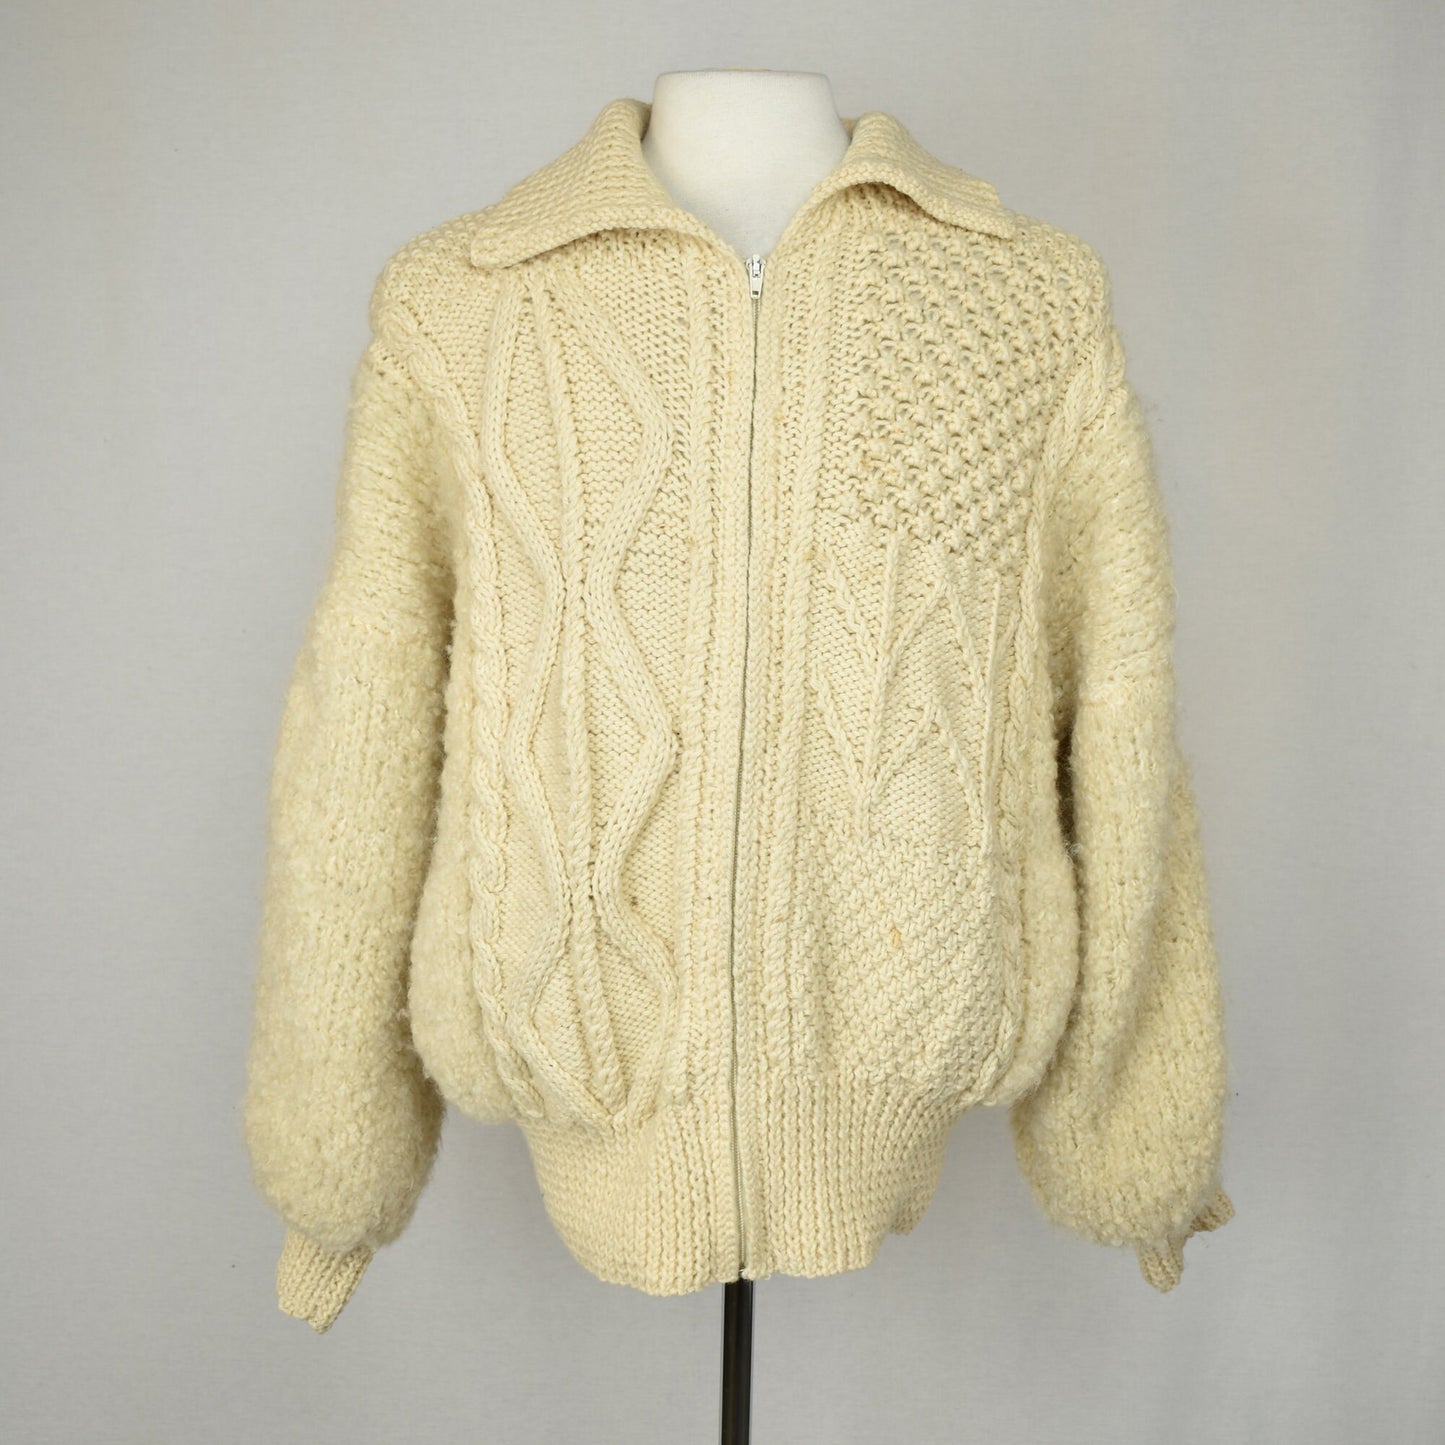 The Perfect Vintage Irish Knit - Fisherman Sweater - Zip Up Aran - Cable Knit with Bouclé Balloon Sleeves - Cottagecore